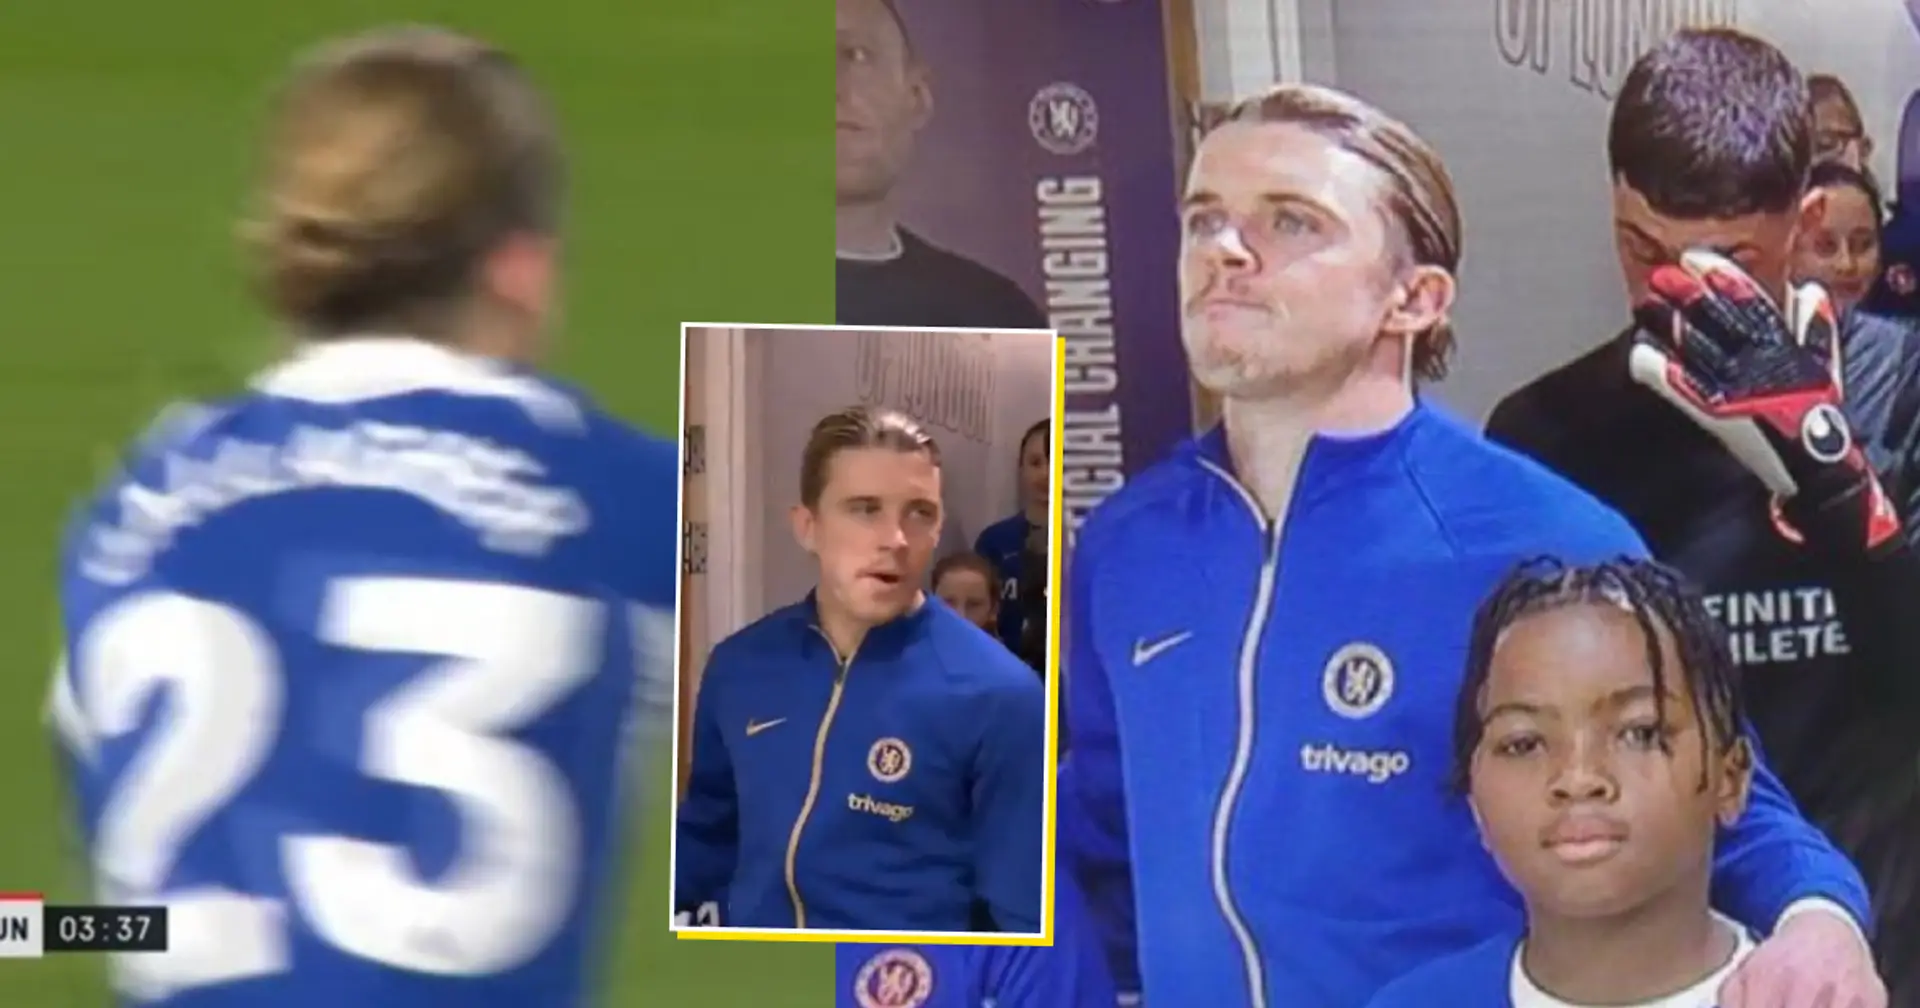 'Gallagher took it to heart': Conor scores for Chelsea in first game after racism allegations